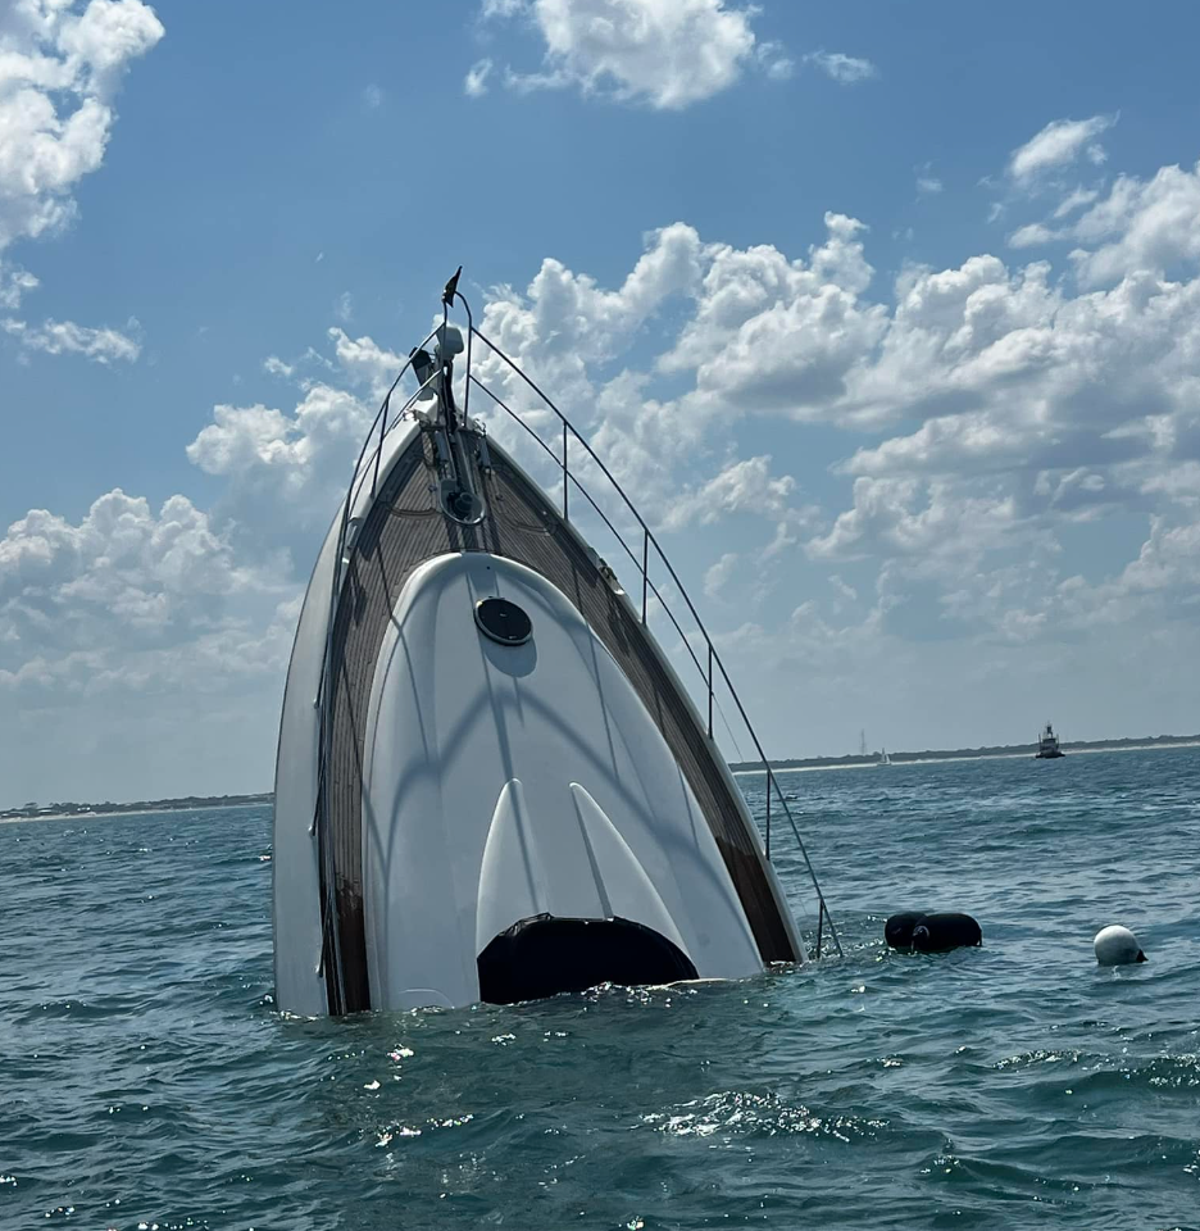 Luxurious 80ft sports activities yacht sinks off Florida coast triggering coast guard rescue